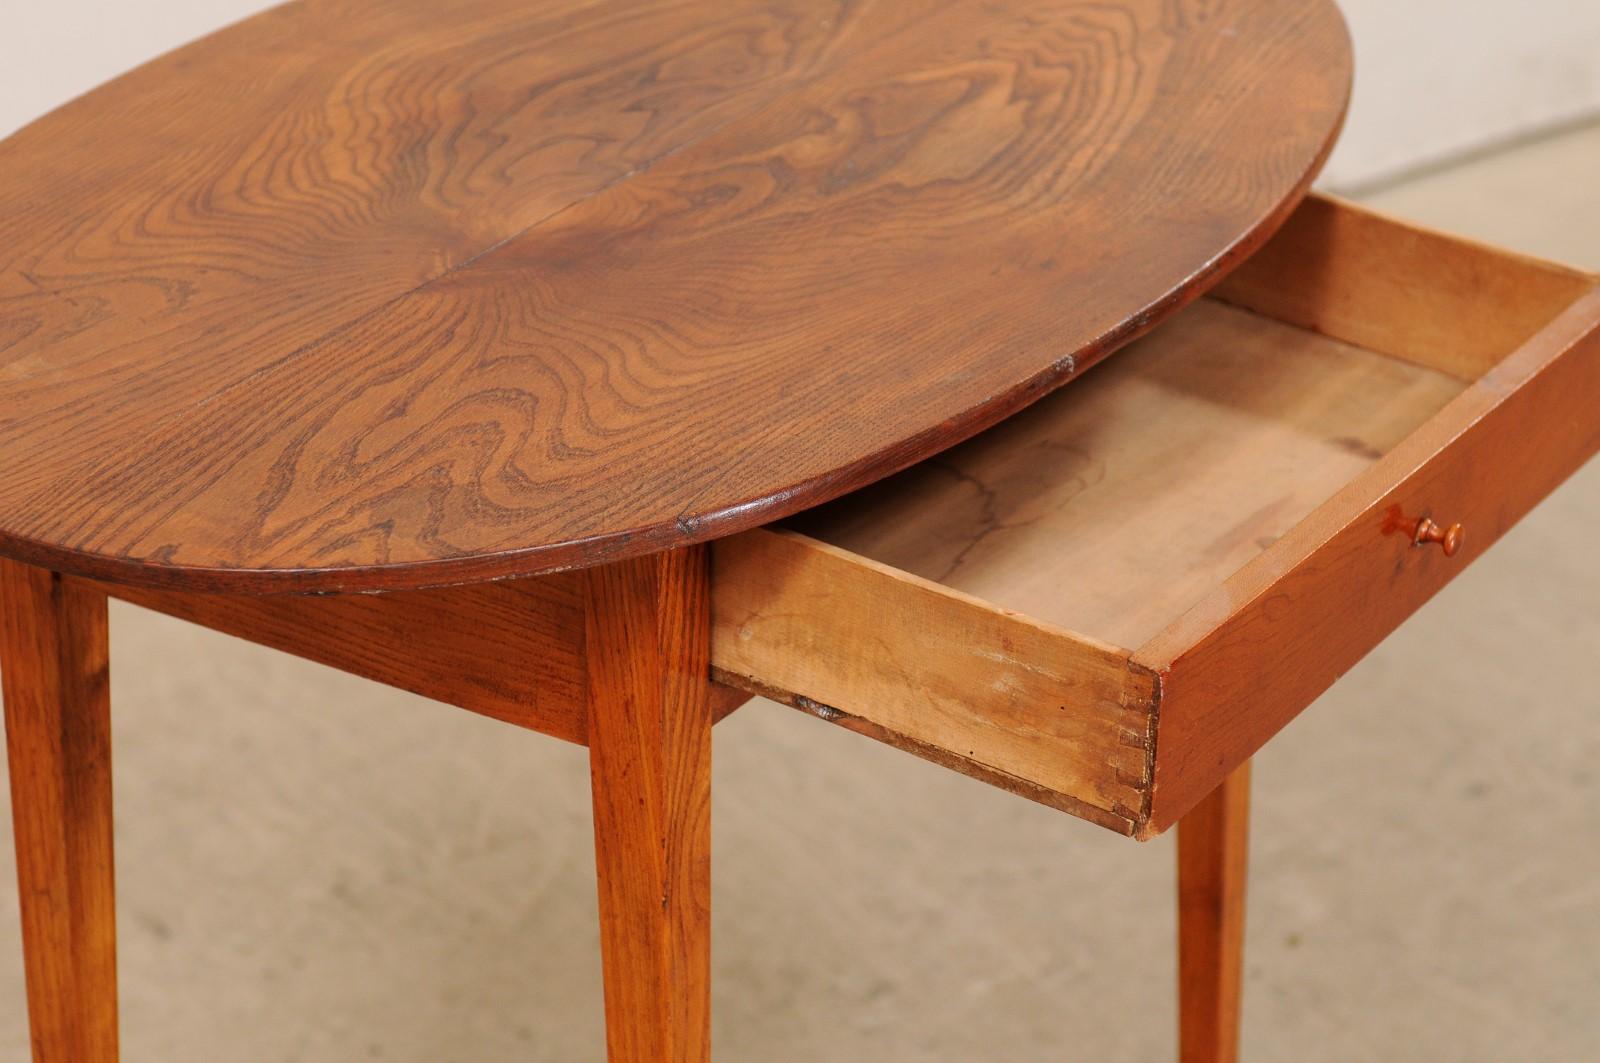 Swedish Elm Wood Table with Oval-Shaped Wide Top and Single Drawer 1